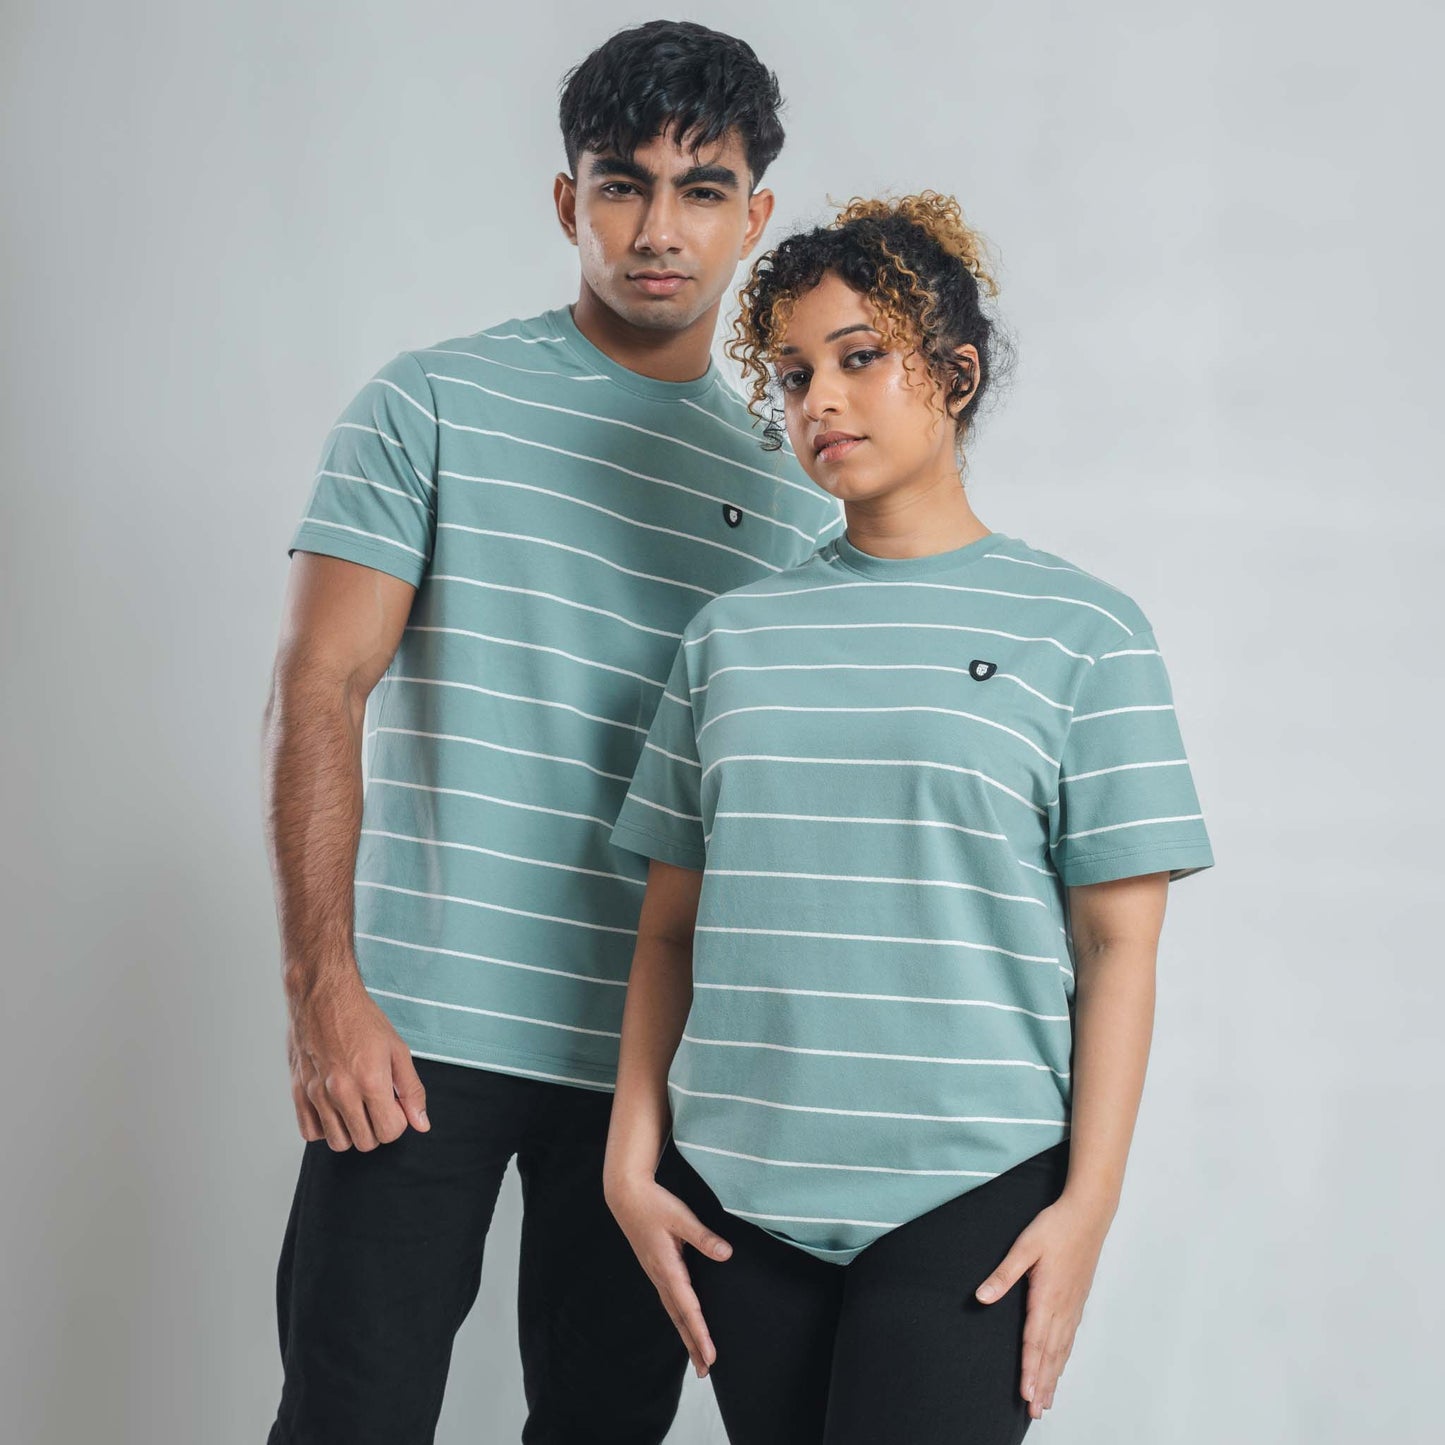 Regular Stripe T-shirt With Street82 small Badge right chest